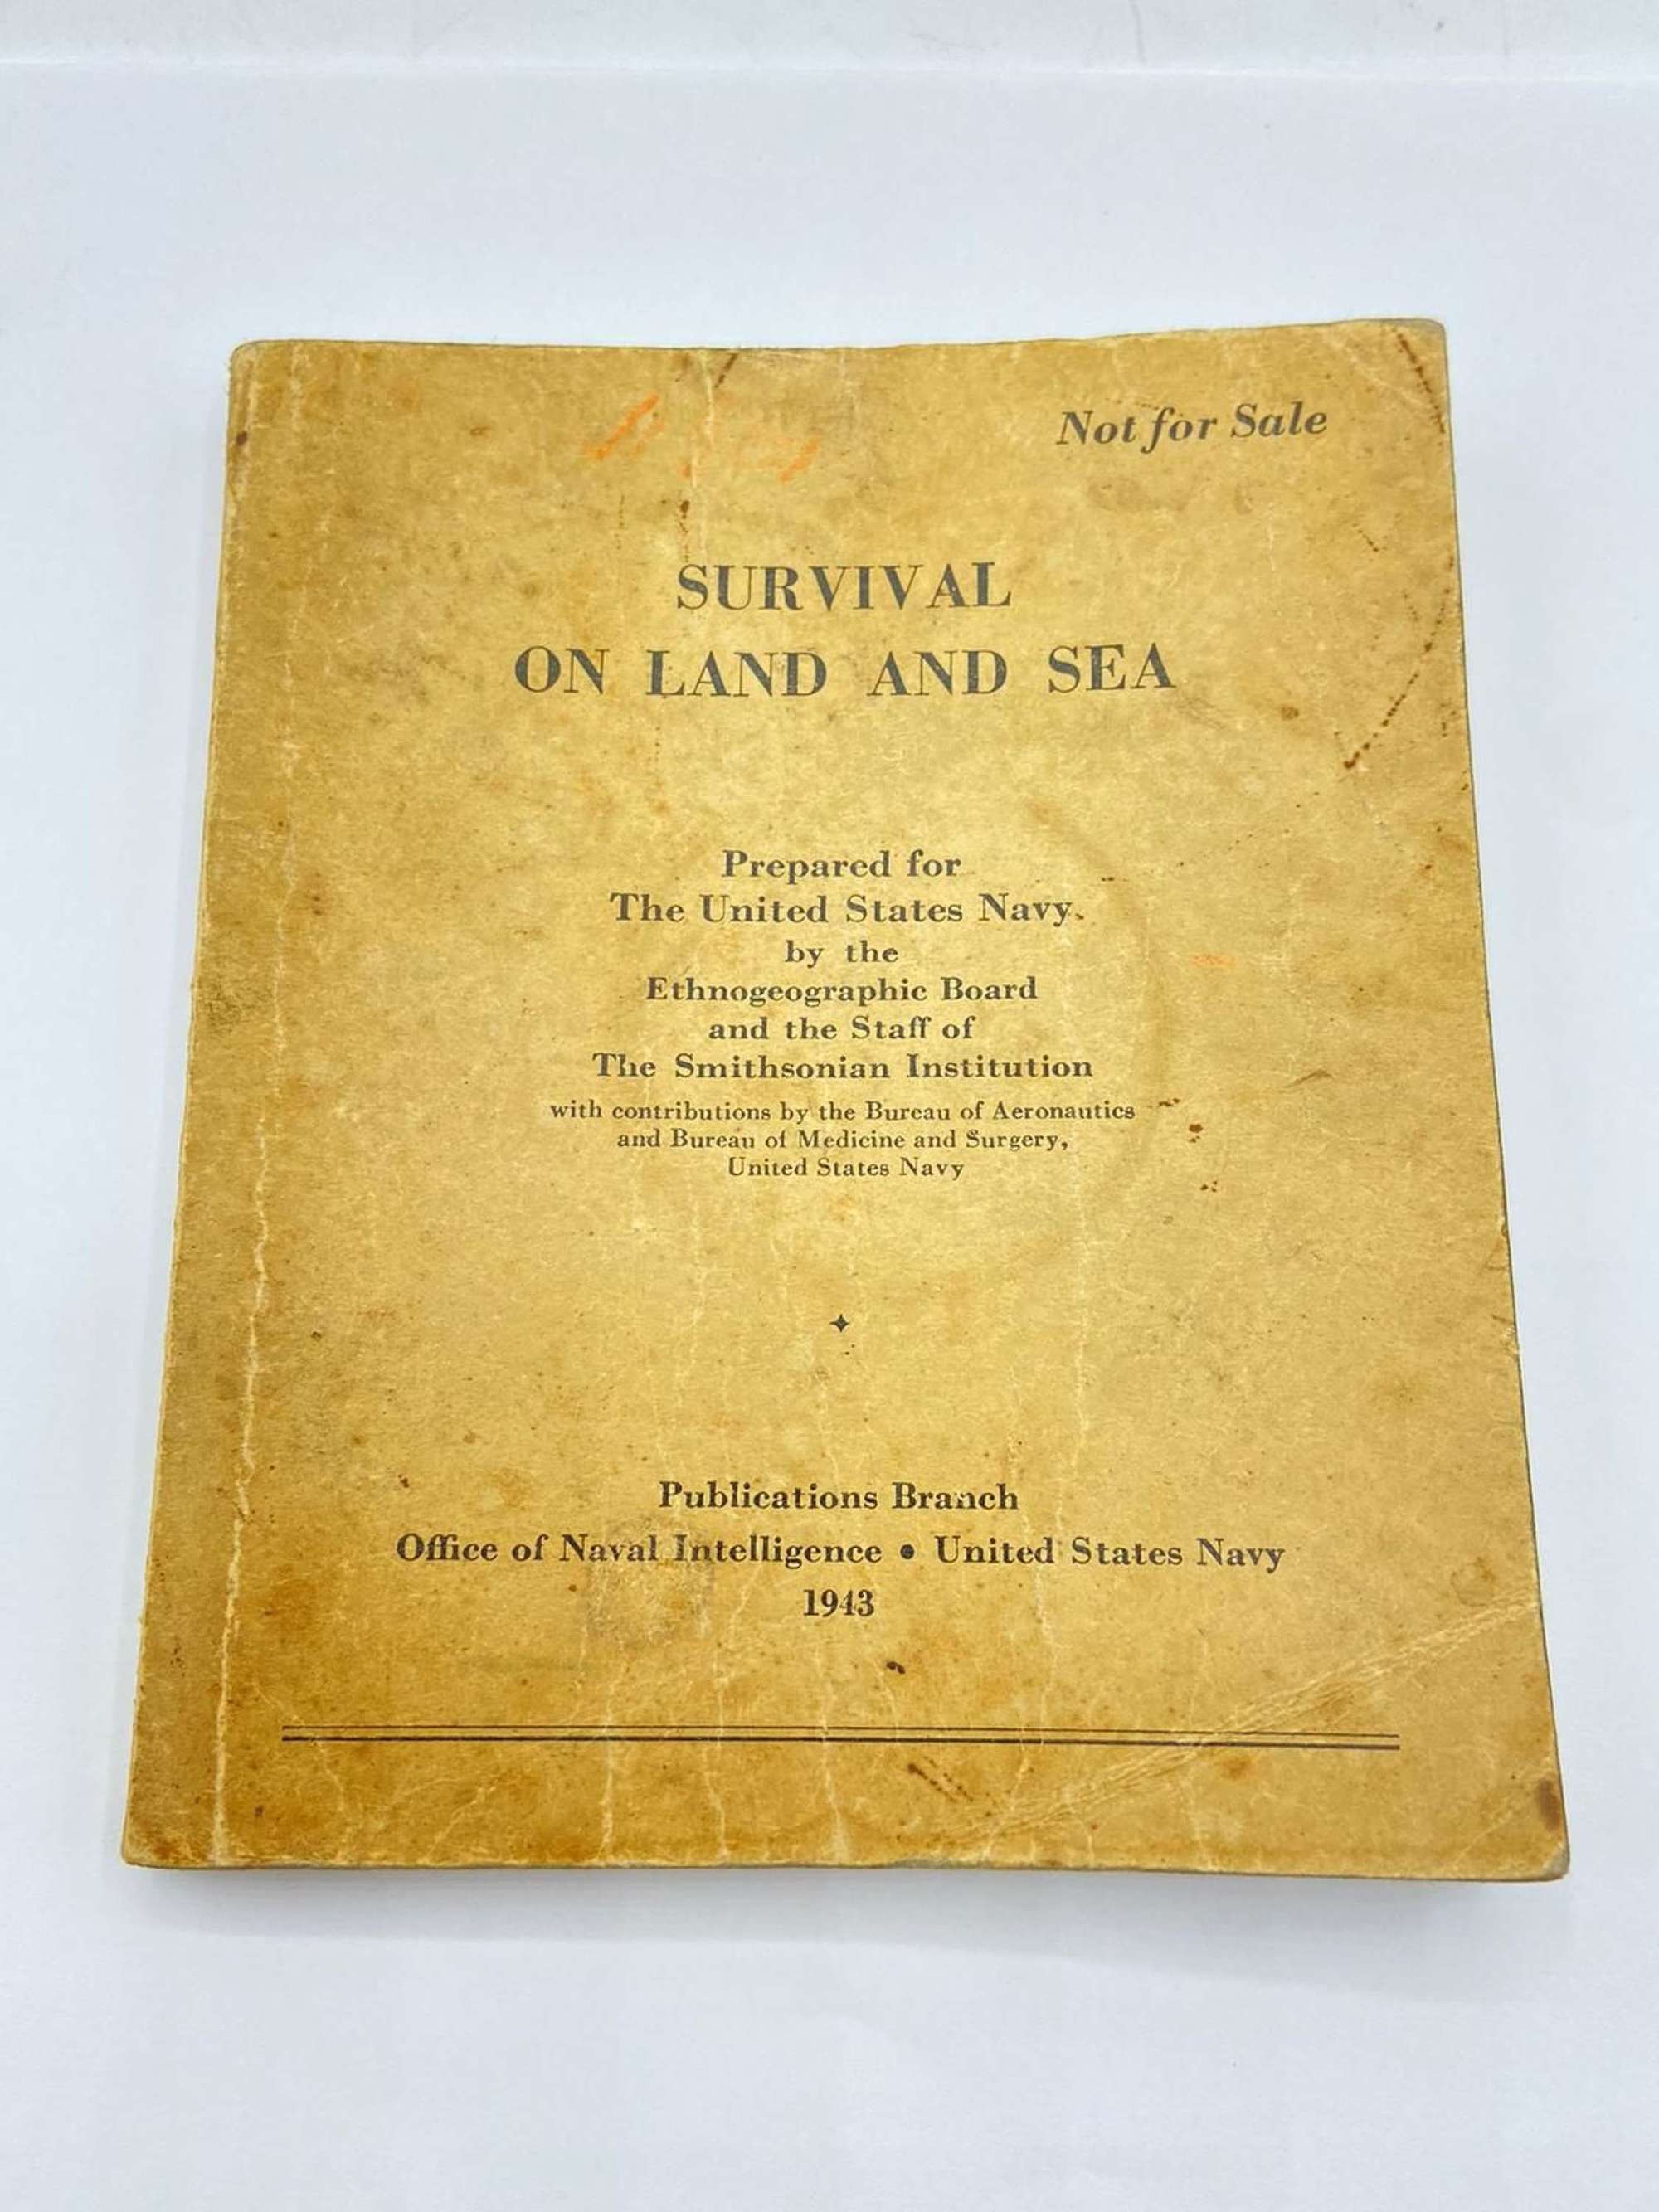 WW2 Survival On Land And Sea 1943 US Navy Office Of Naval Intelligence